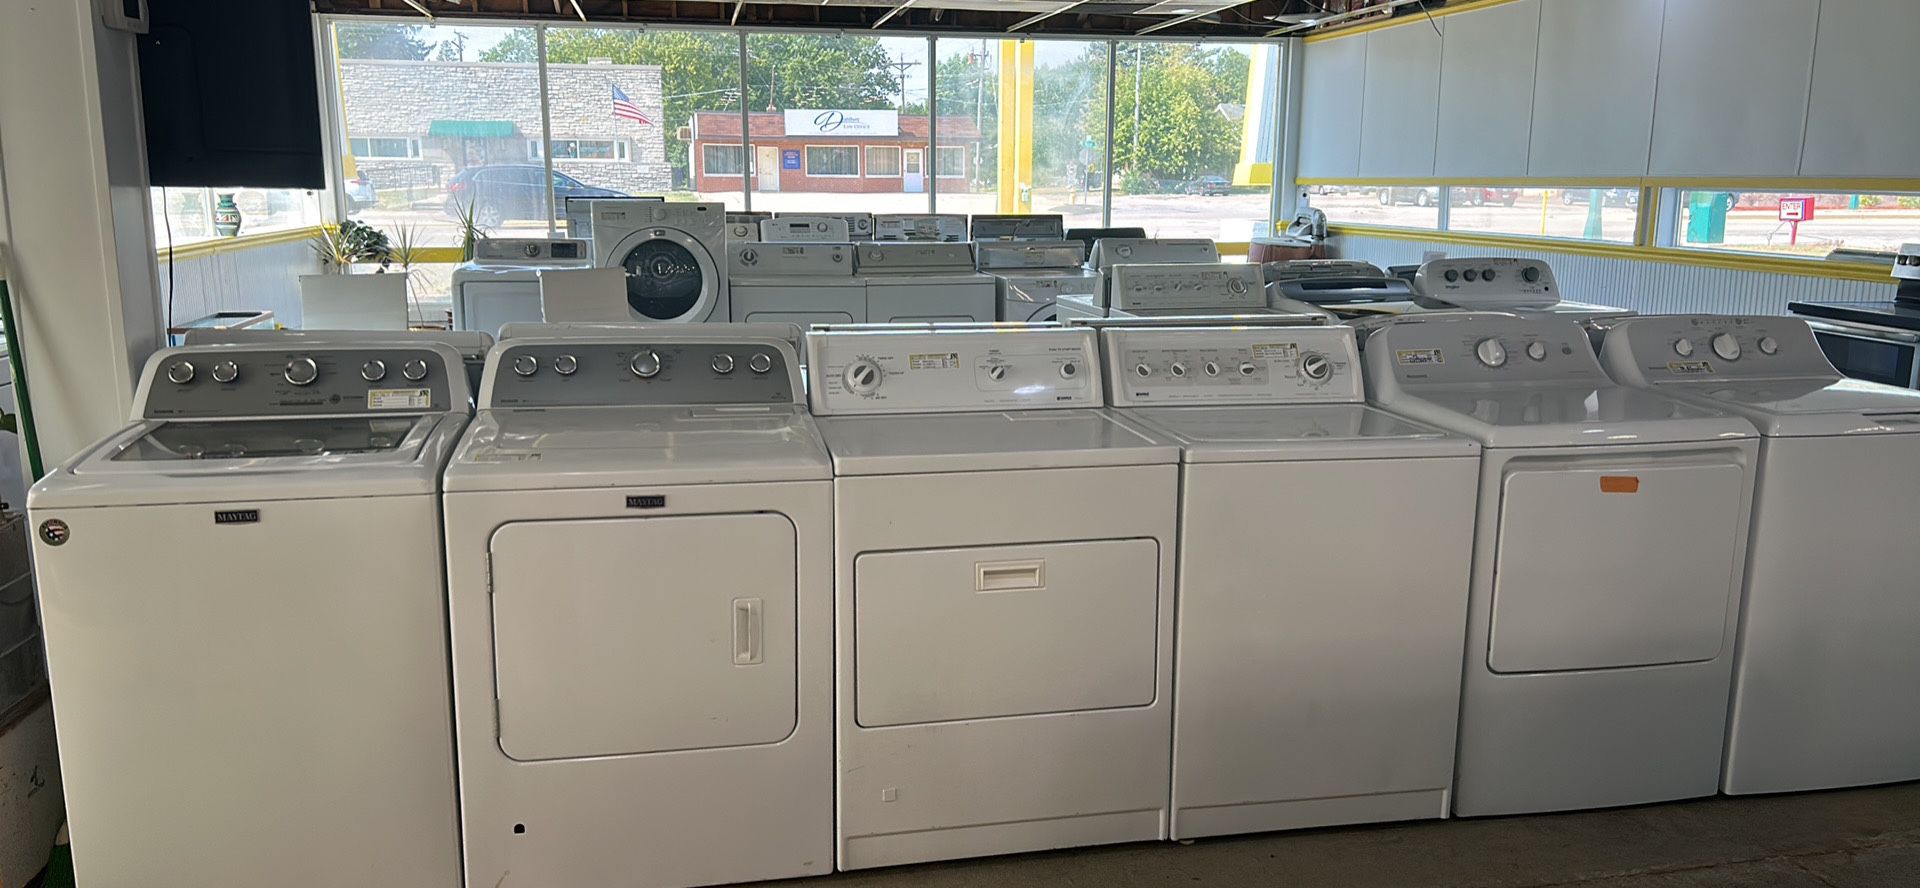 Washers And Dryers Sets $500-$600